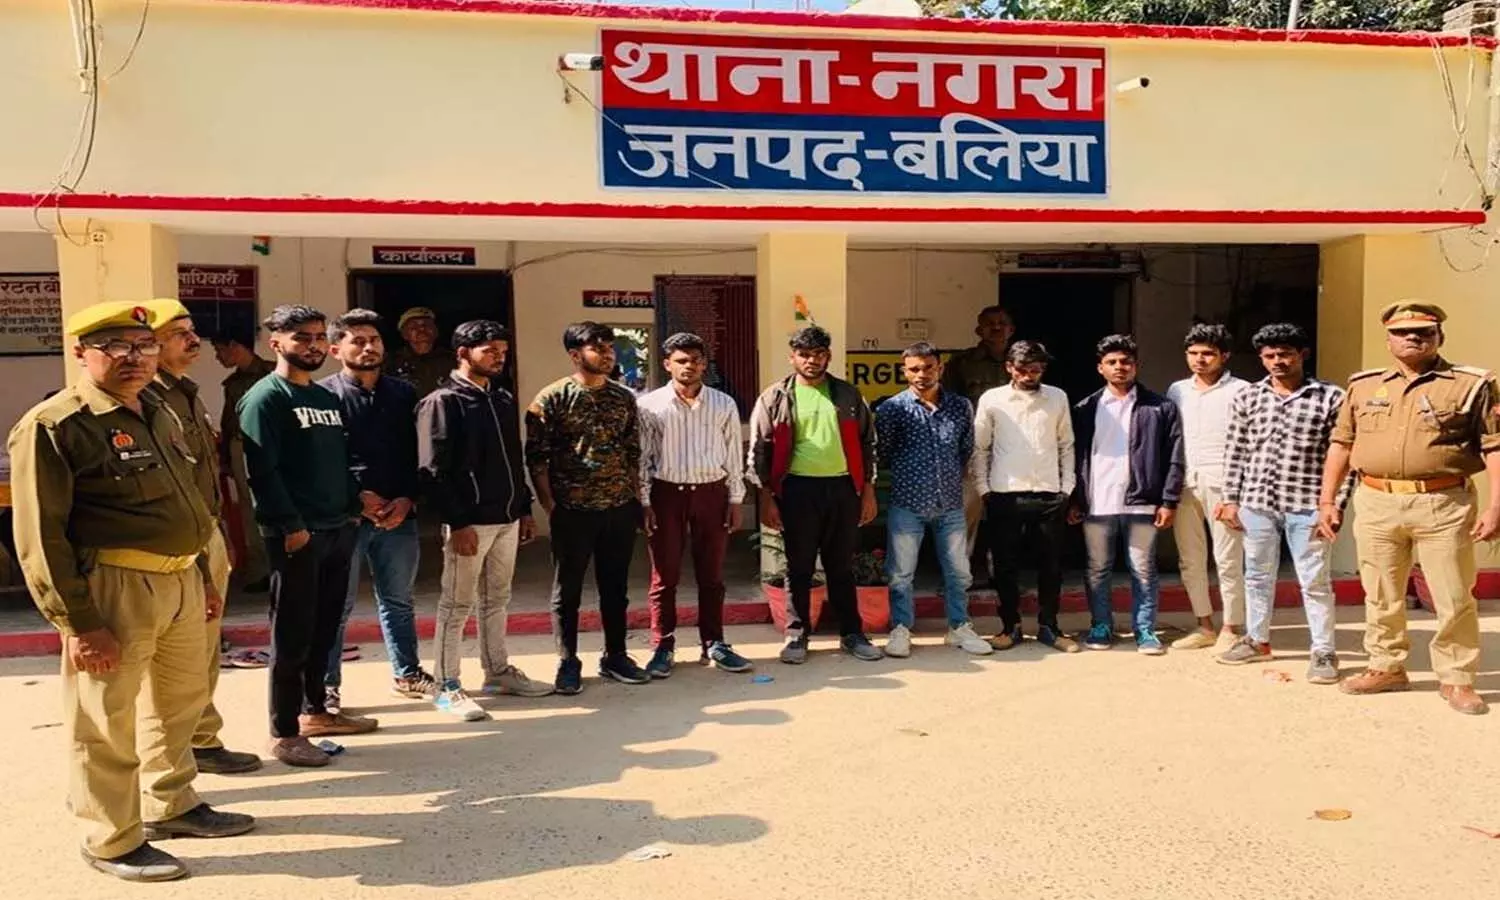 13 copycats caught in UP board exam in Ballia, sent to jail